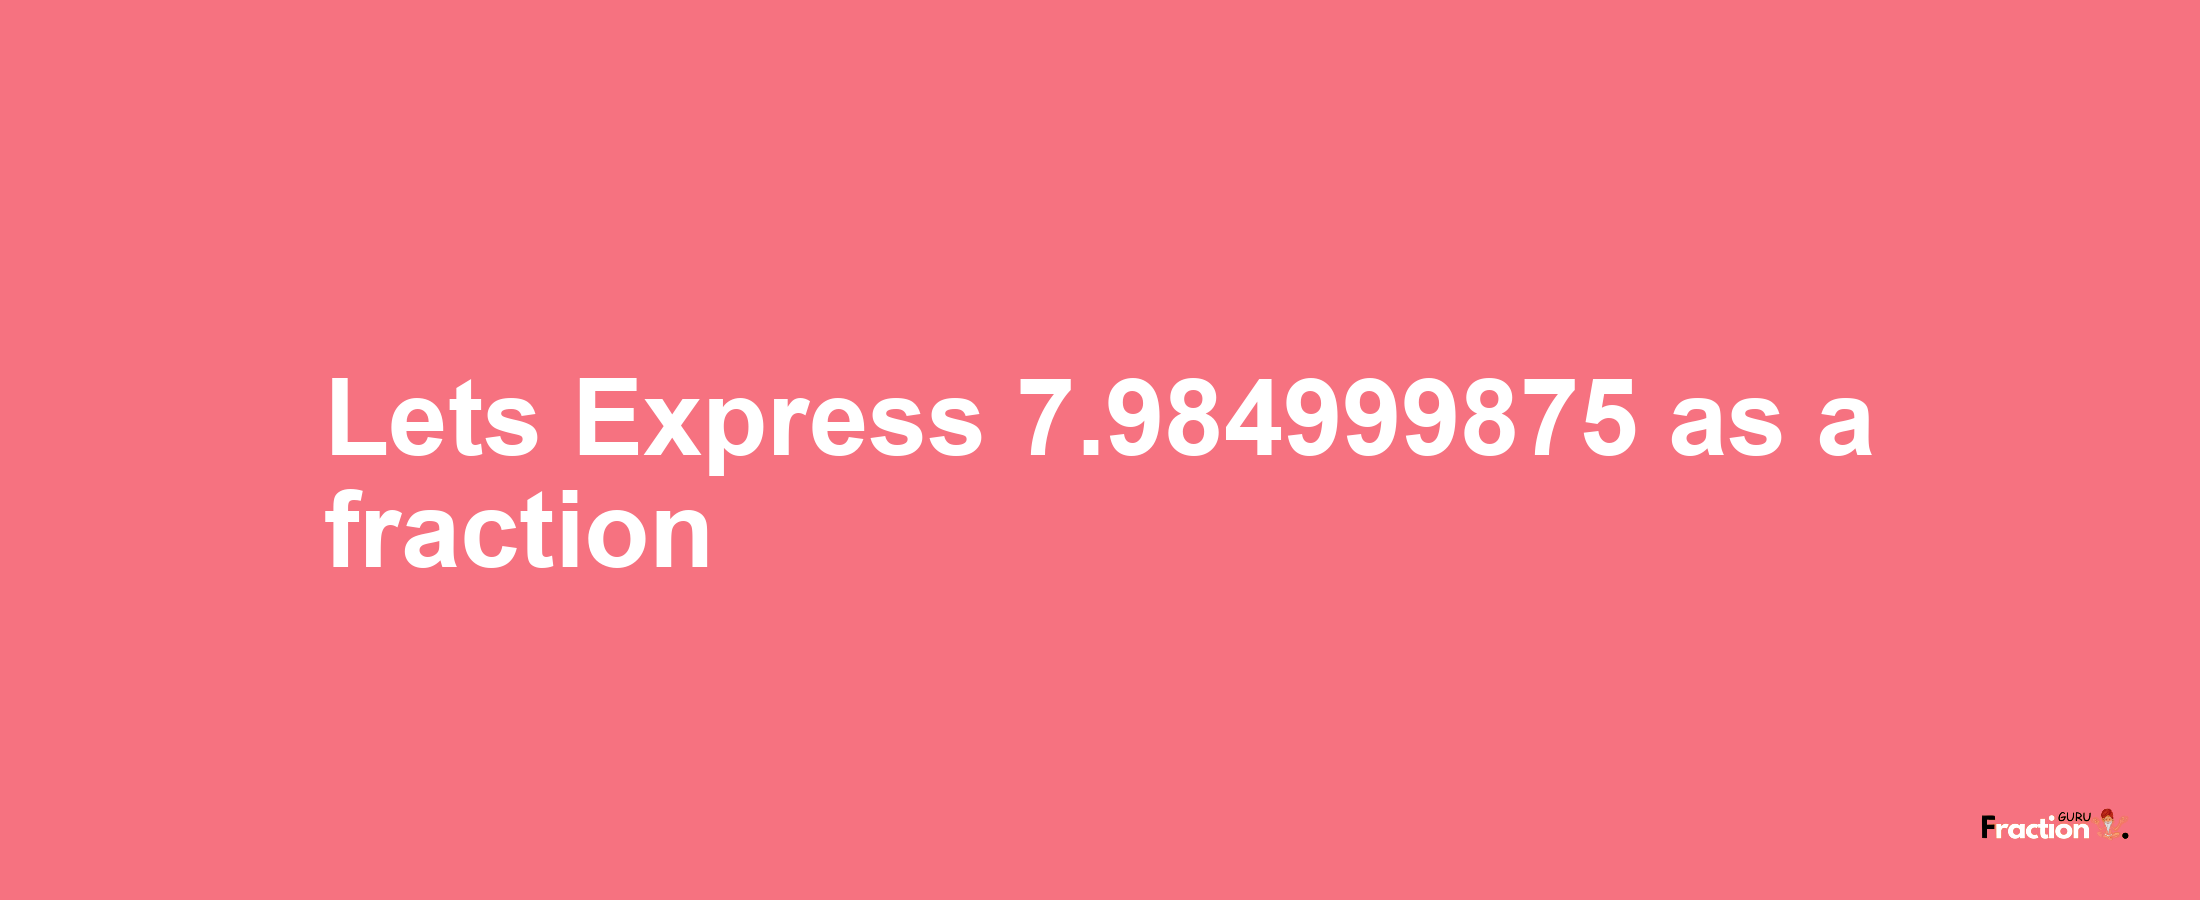 Lets Express 7.984999875 as afraction